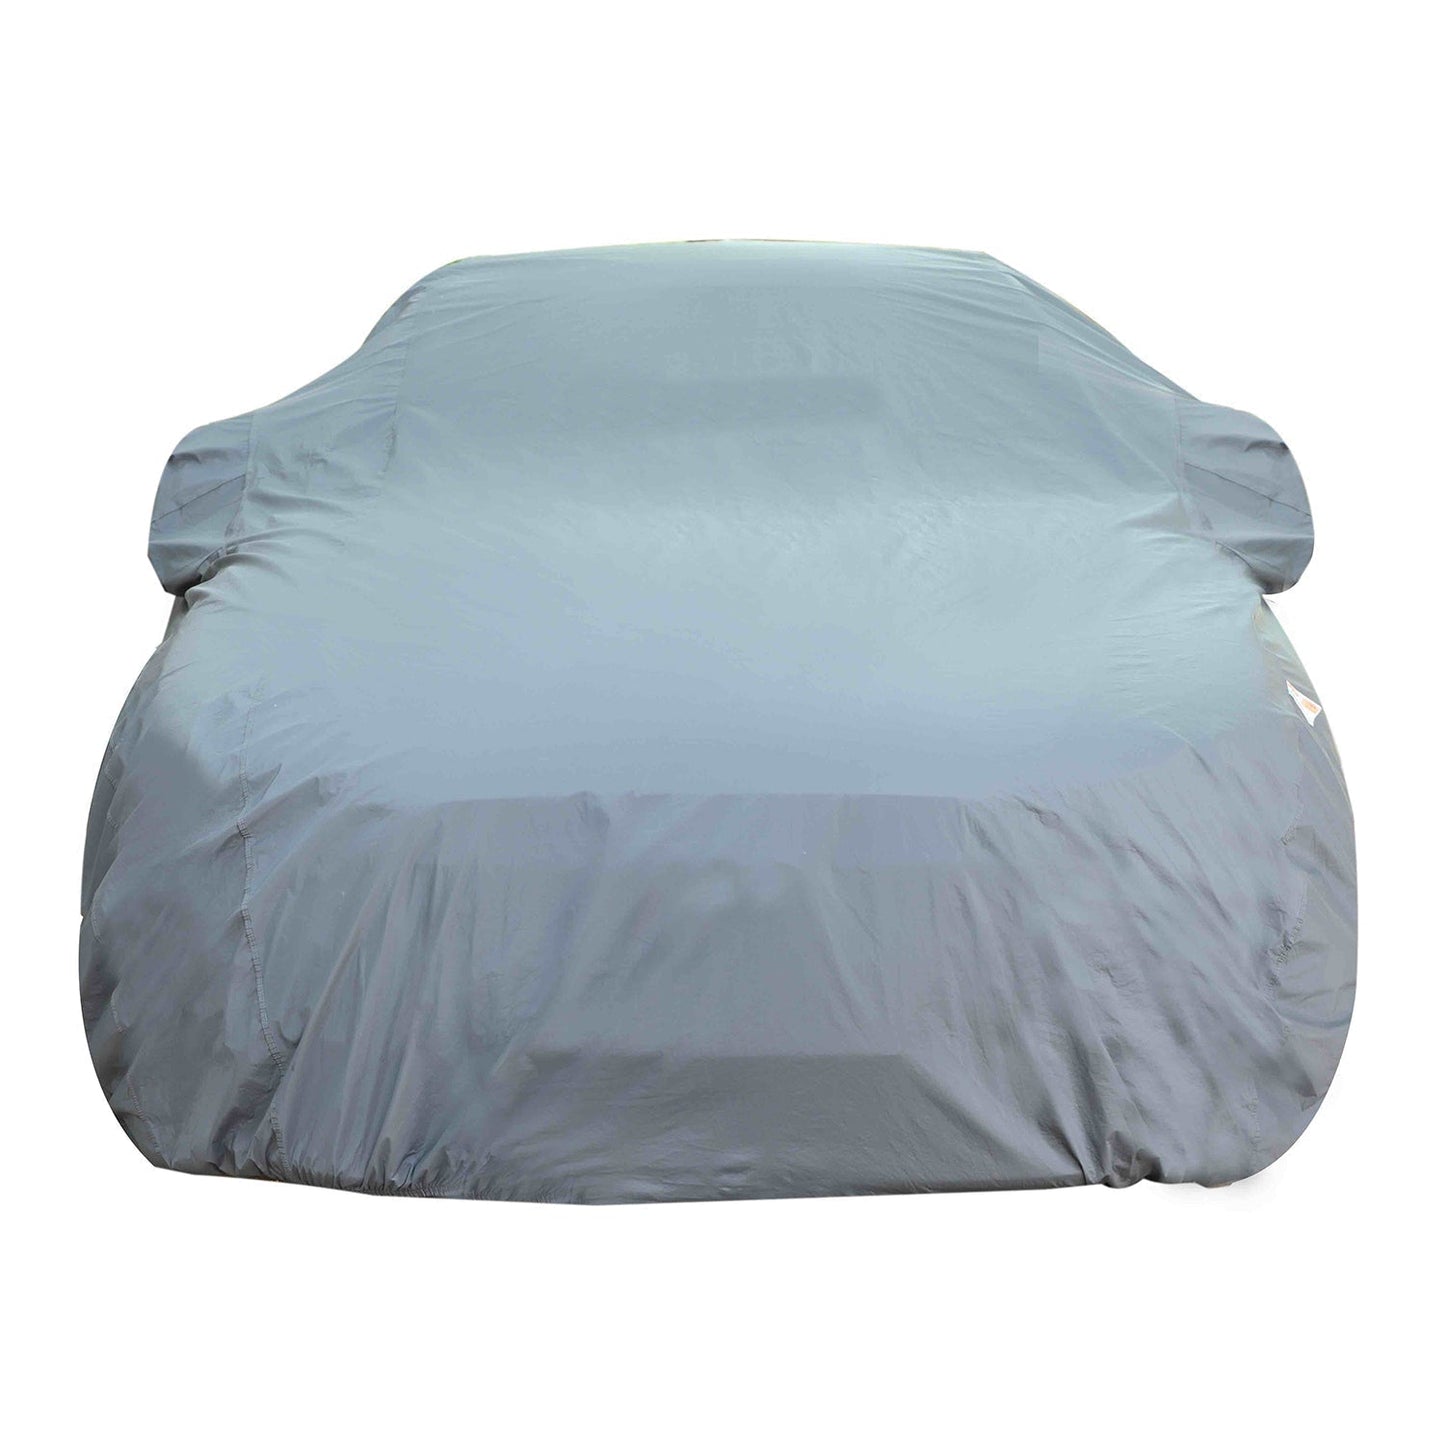 Oshotto Dark Grey 100% Anti Reflective, dustproof and Water Proof Car Body Cover with Mirror Pocket For Chevrolet Spark